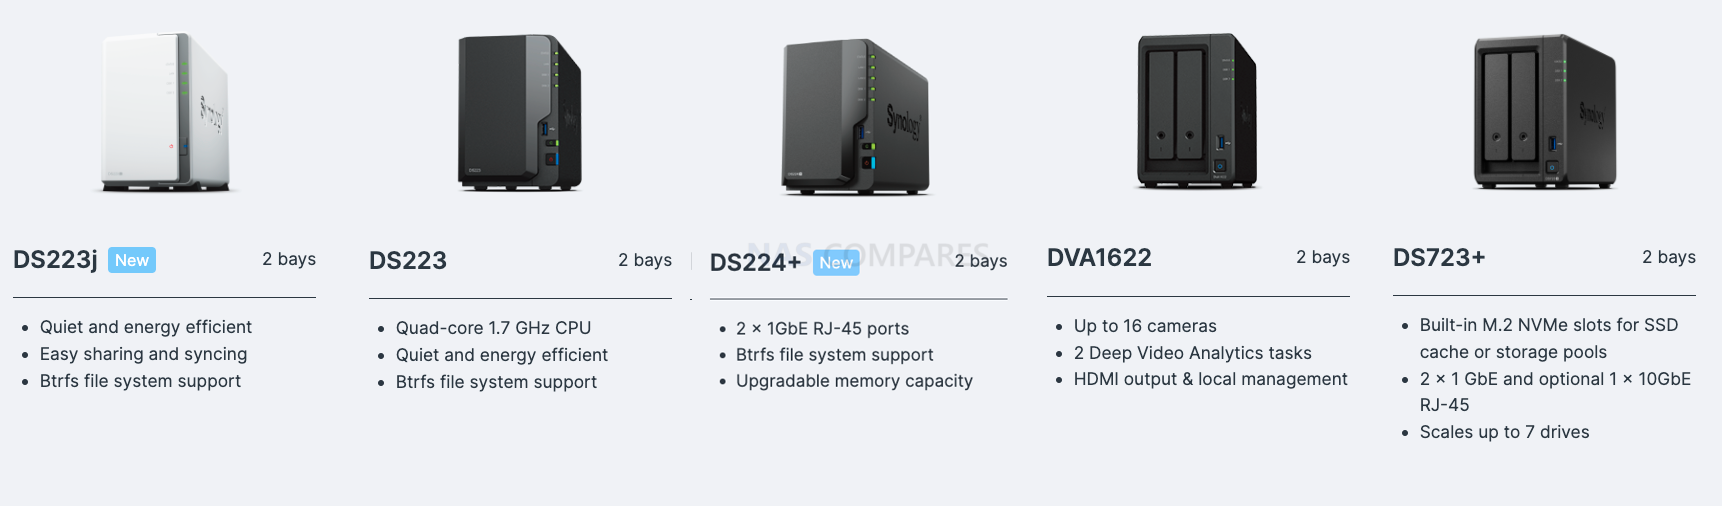 Synology 2-bay NAS range compared (DS223j, DS223, DS224+, DVA1622, DS723+)